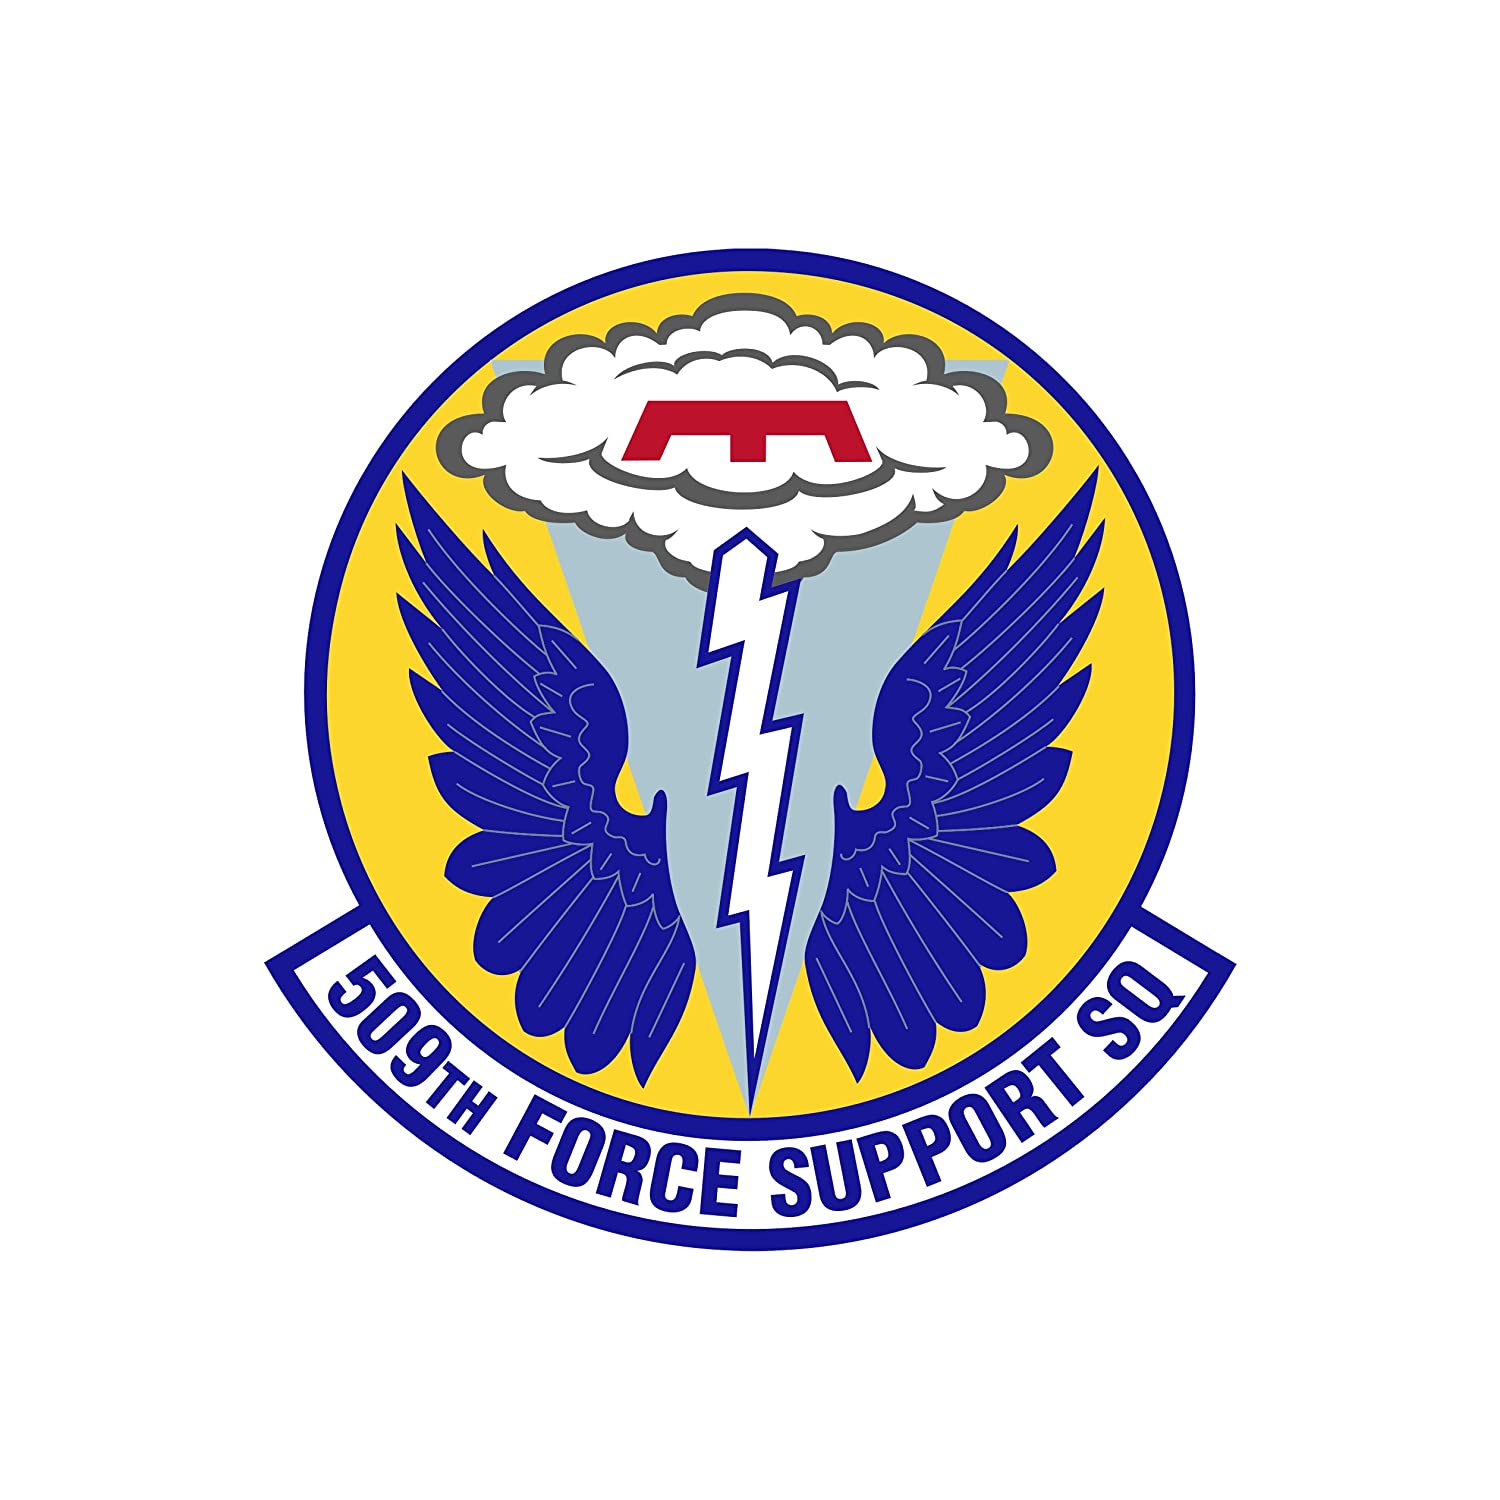 509th Force Support Squadron - Patch Vinyl Decal - Available in Multiple Sizes